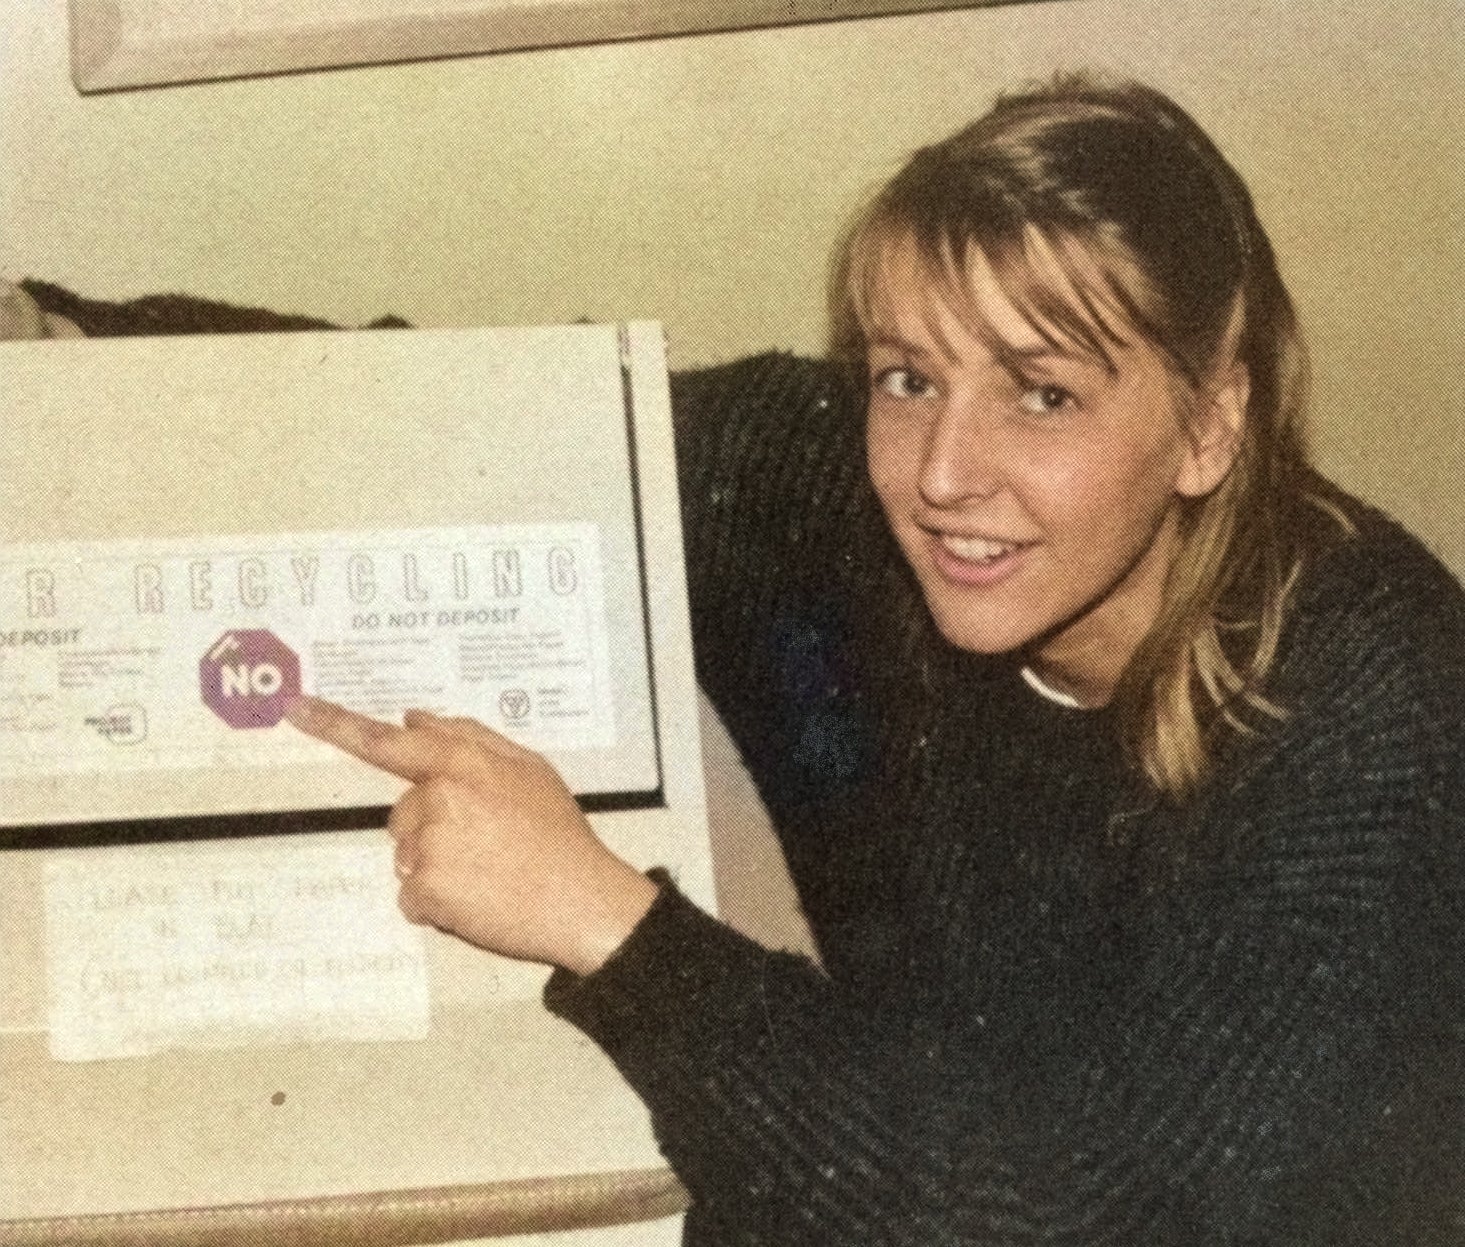 Student points out recycling guide from the 1980s